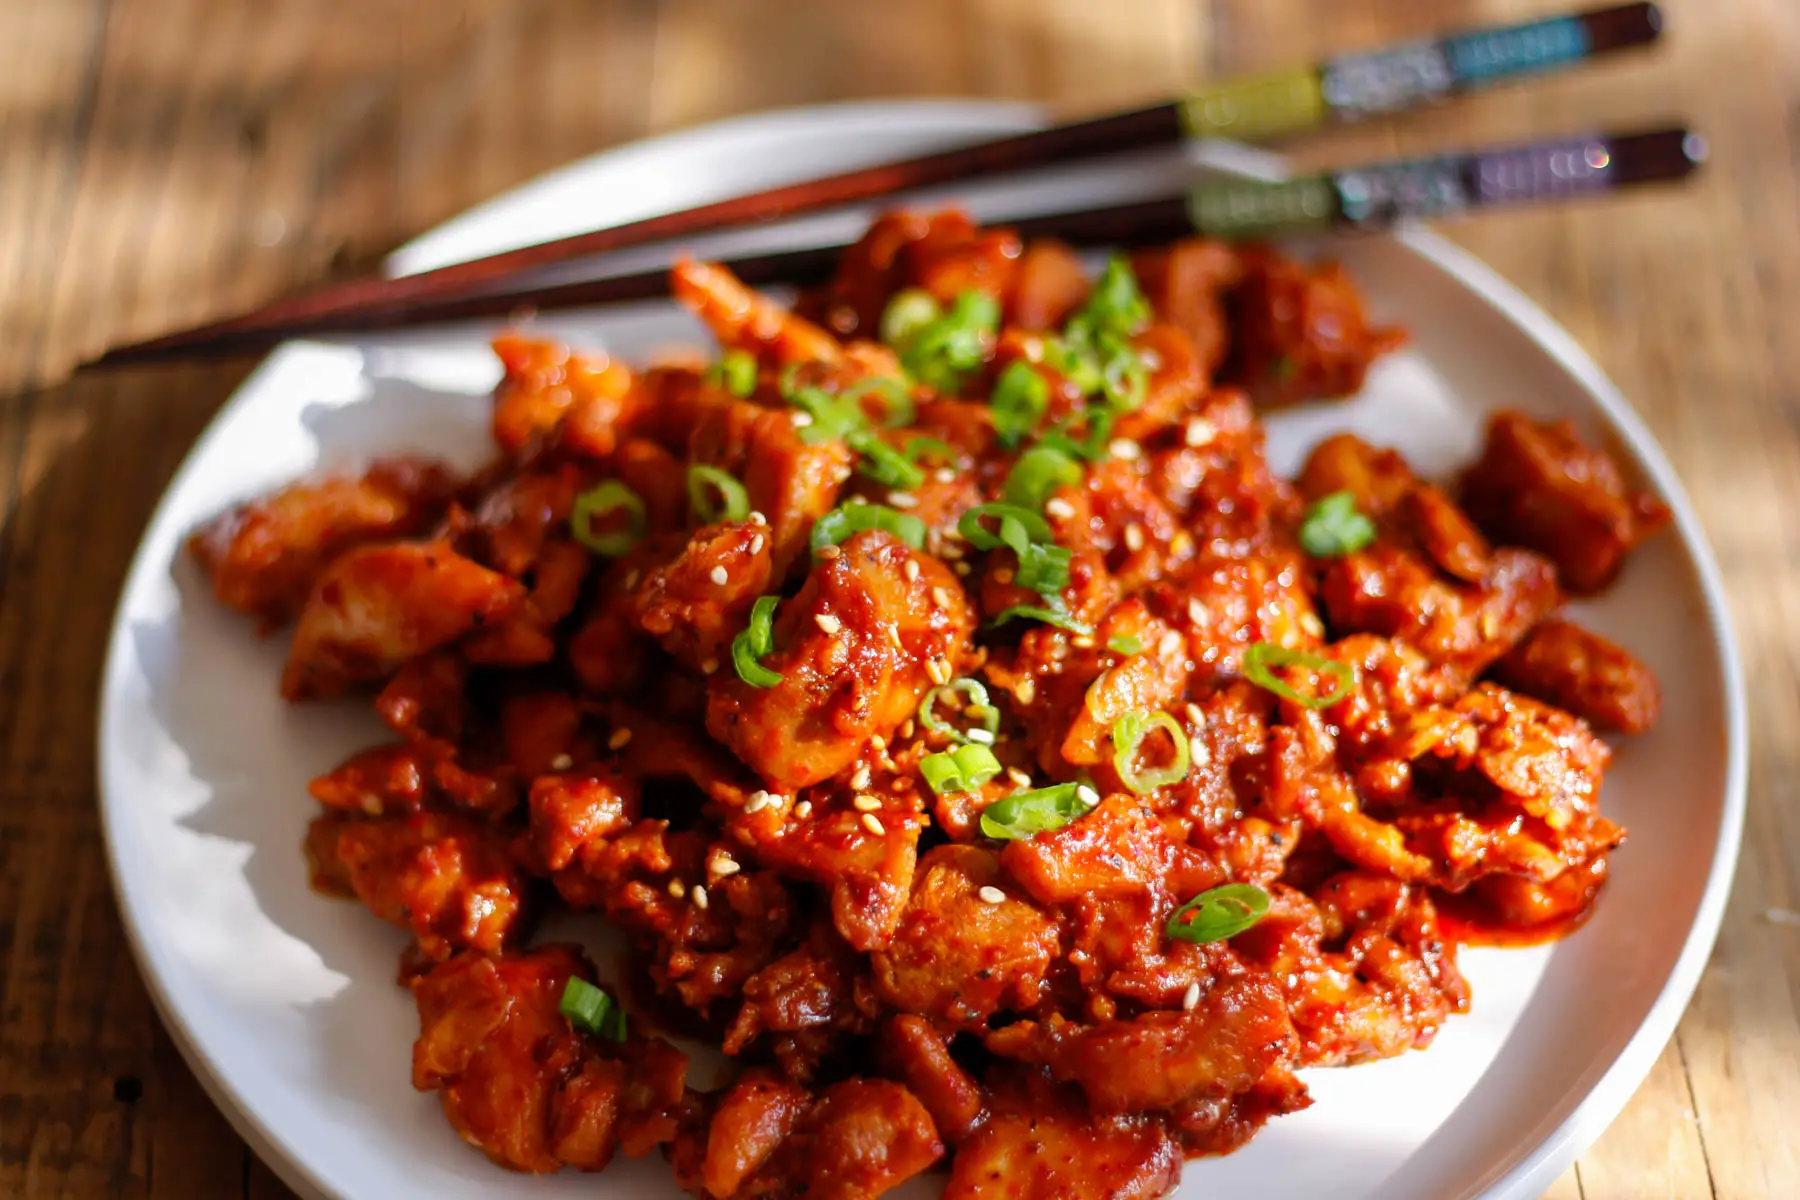 Spicy Chicken Bulgogi garnished with green onions and sesame seeds on a white plate with a pair of chopsticks.